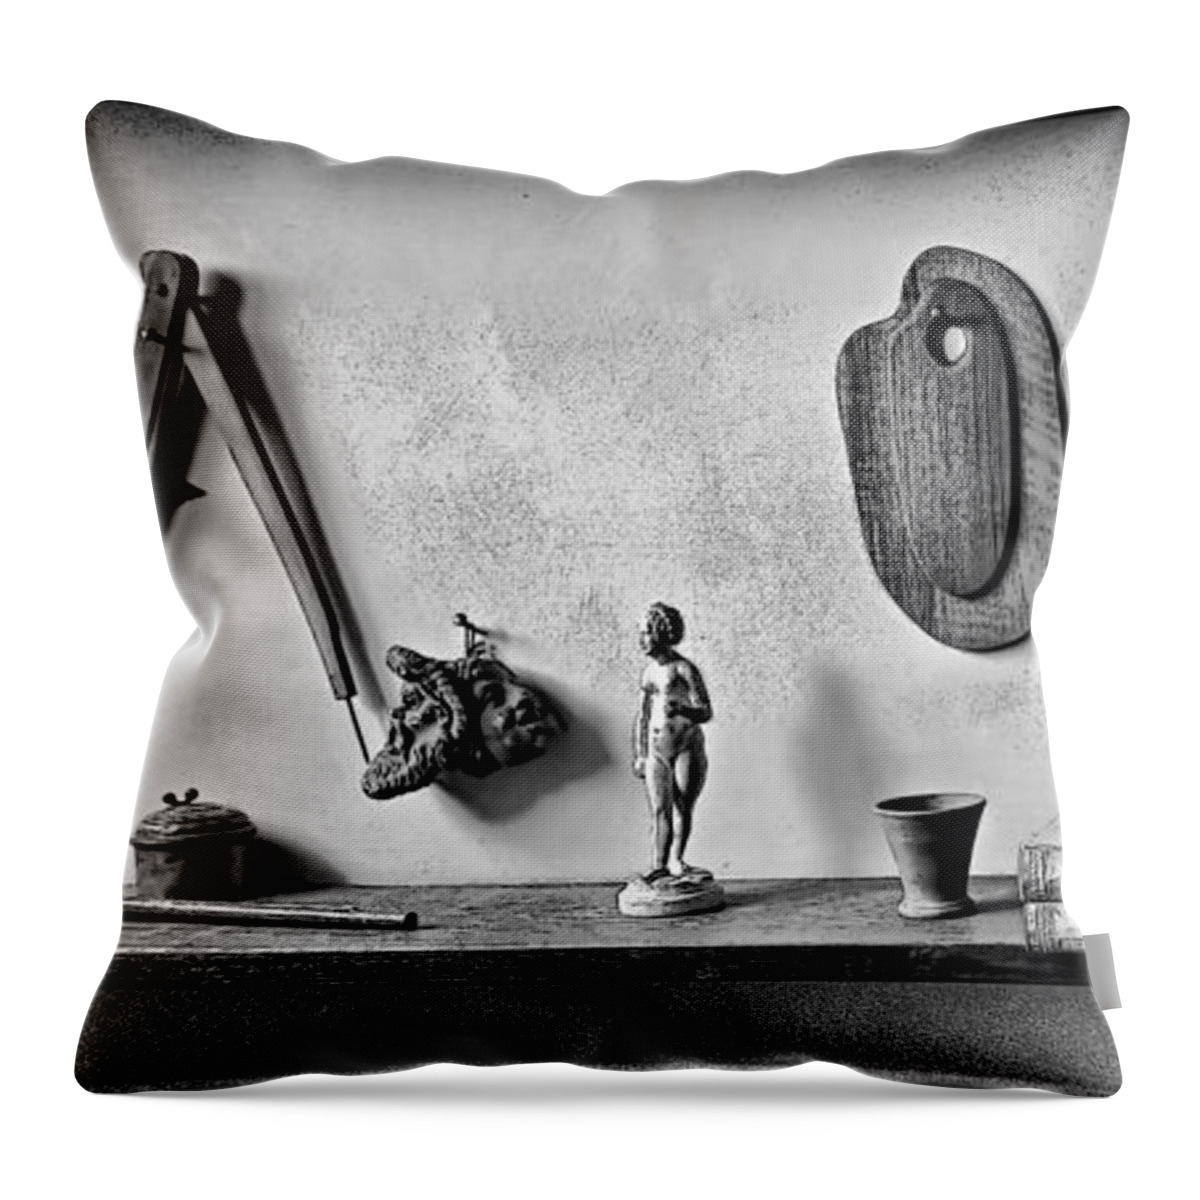 Andrei Throw Pillow featuring the photograph Bookshelf at Rembrandt House Museum by Andrei SKY